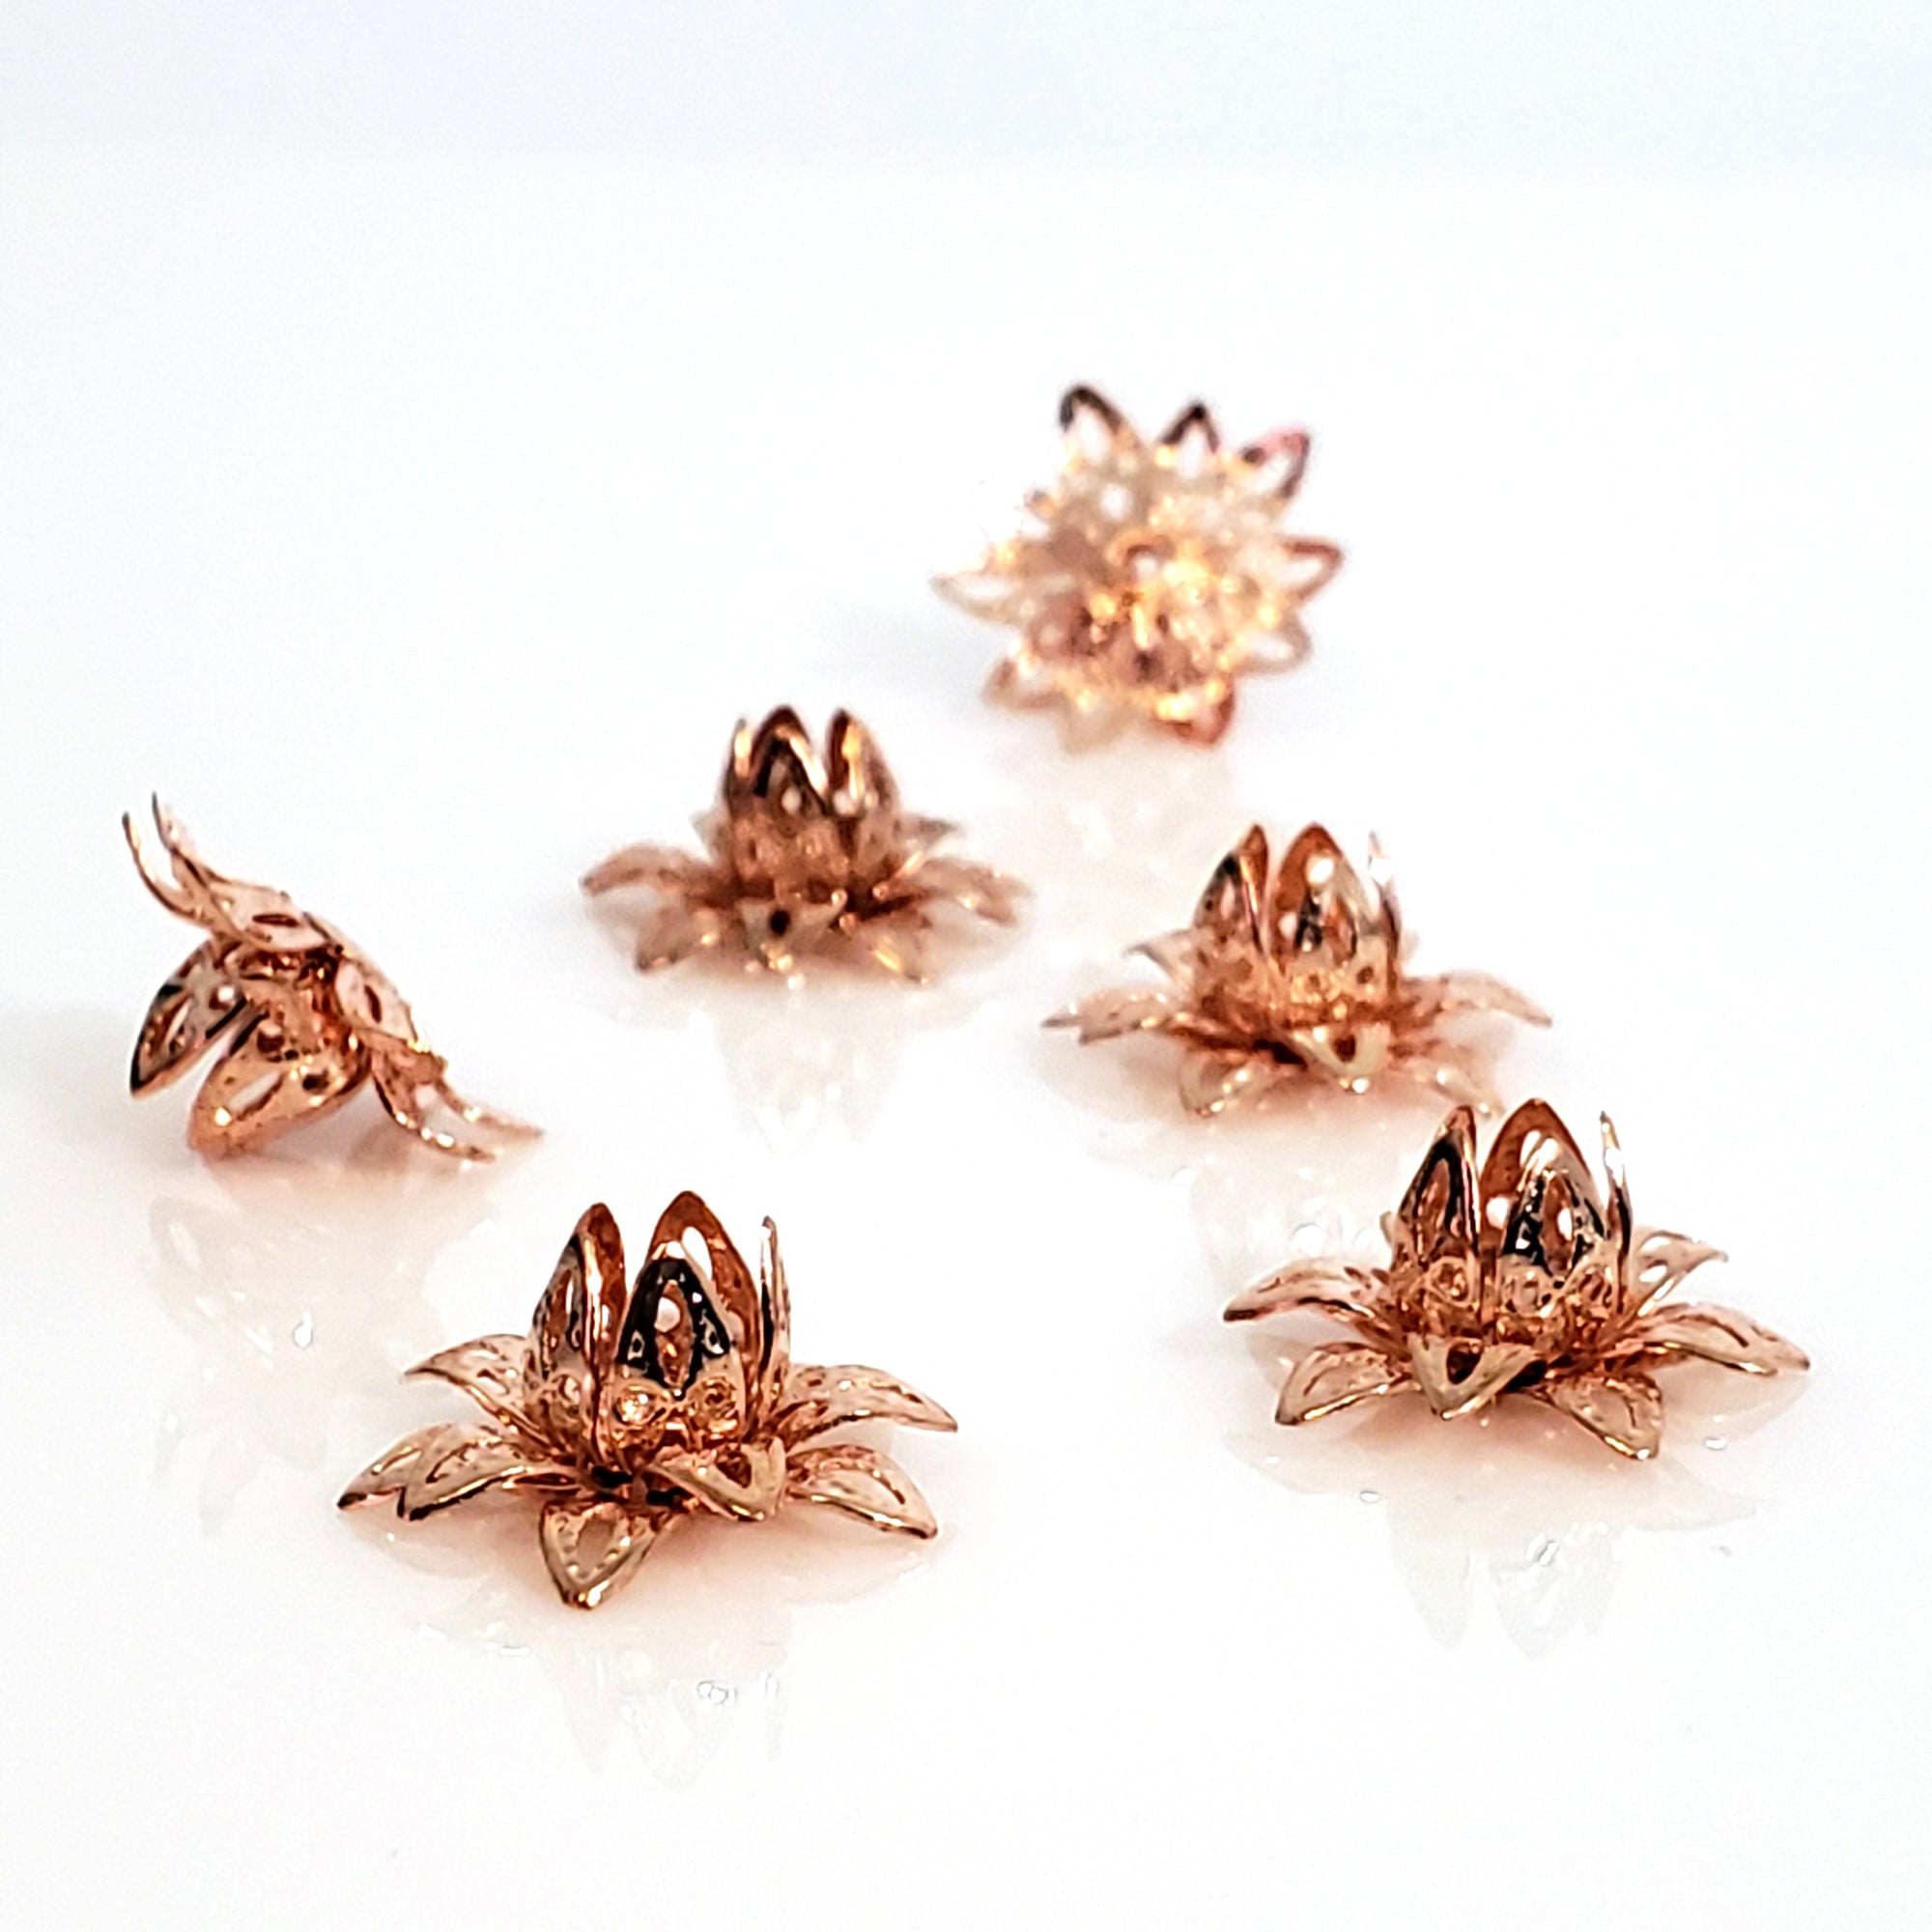 500pcs 11mm Gold Tone Lotus Flower Bead Caps Hollow Flower Bead Caps for Jewelry Making (Rose Gold)